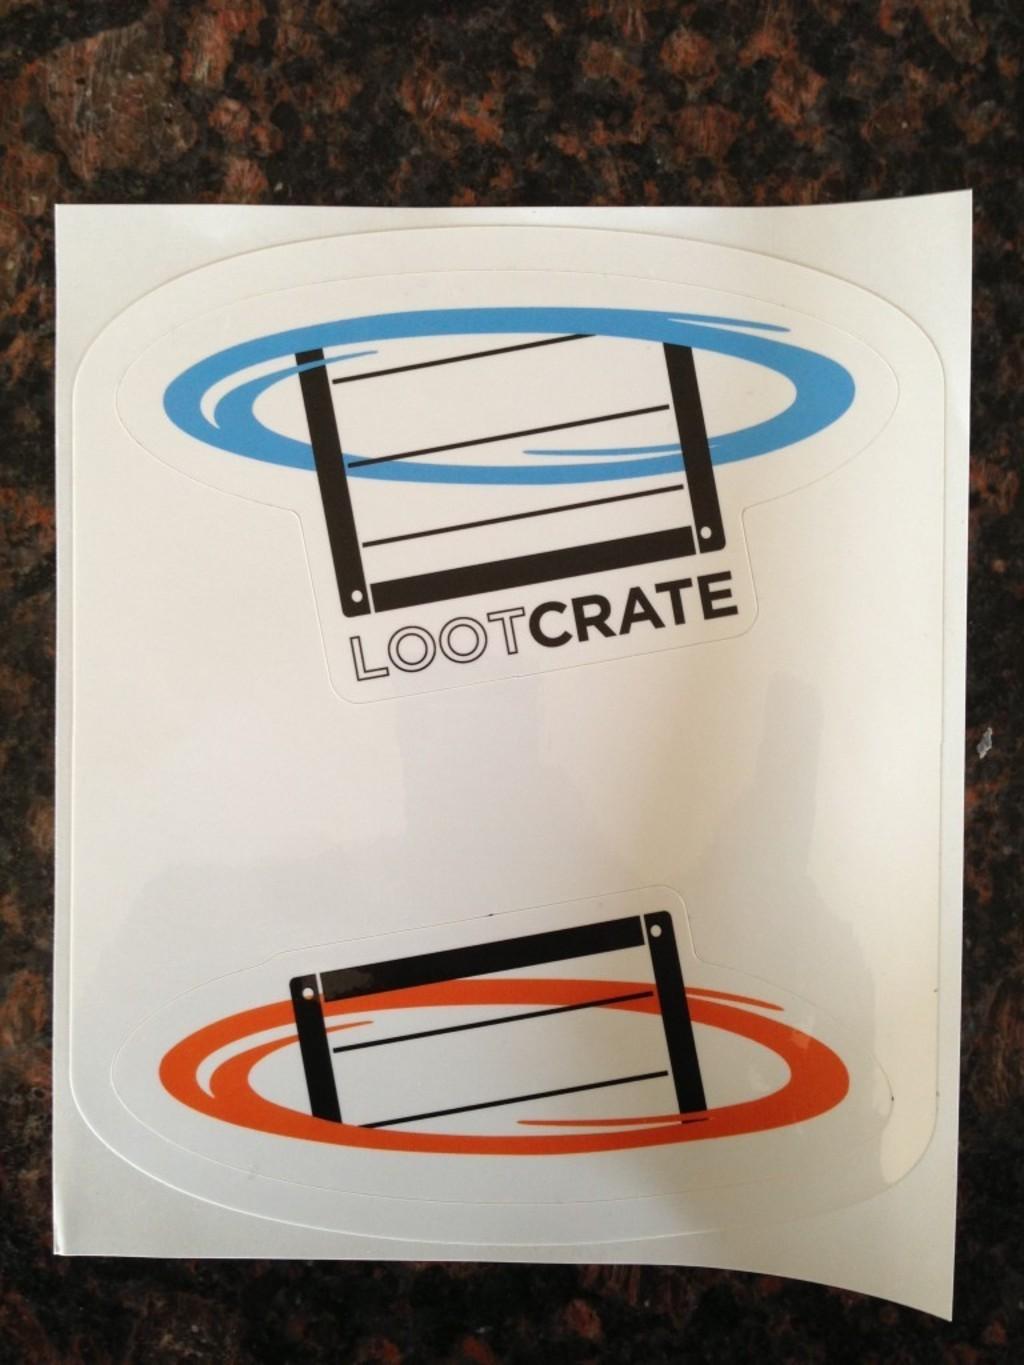 August 2013 Loot Crate - "Cake"